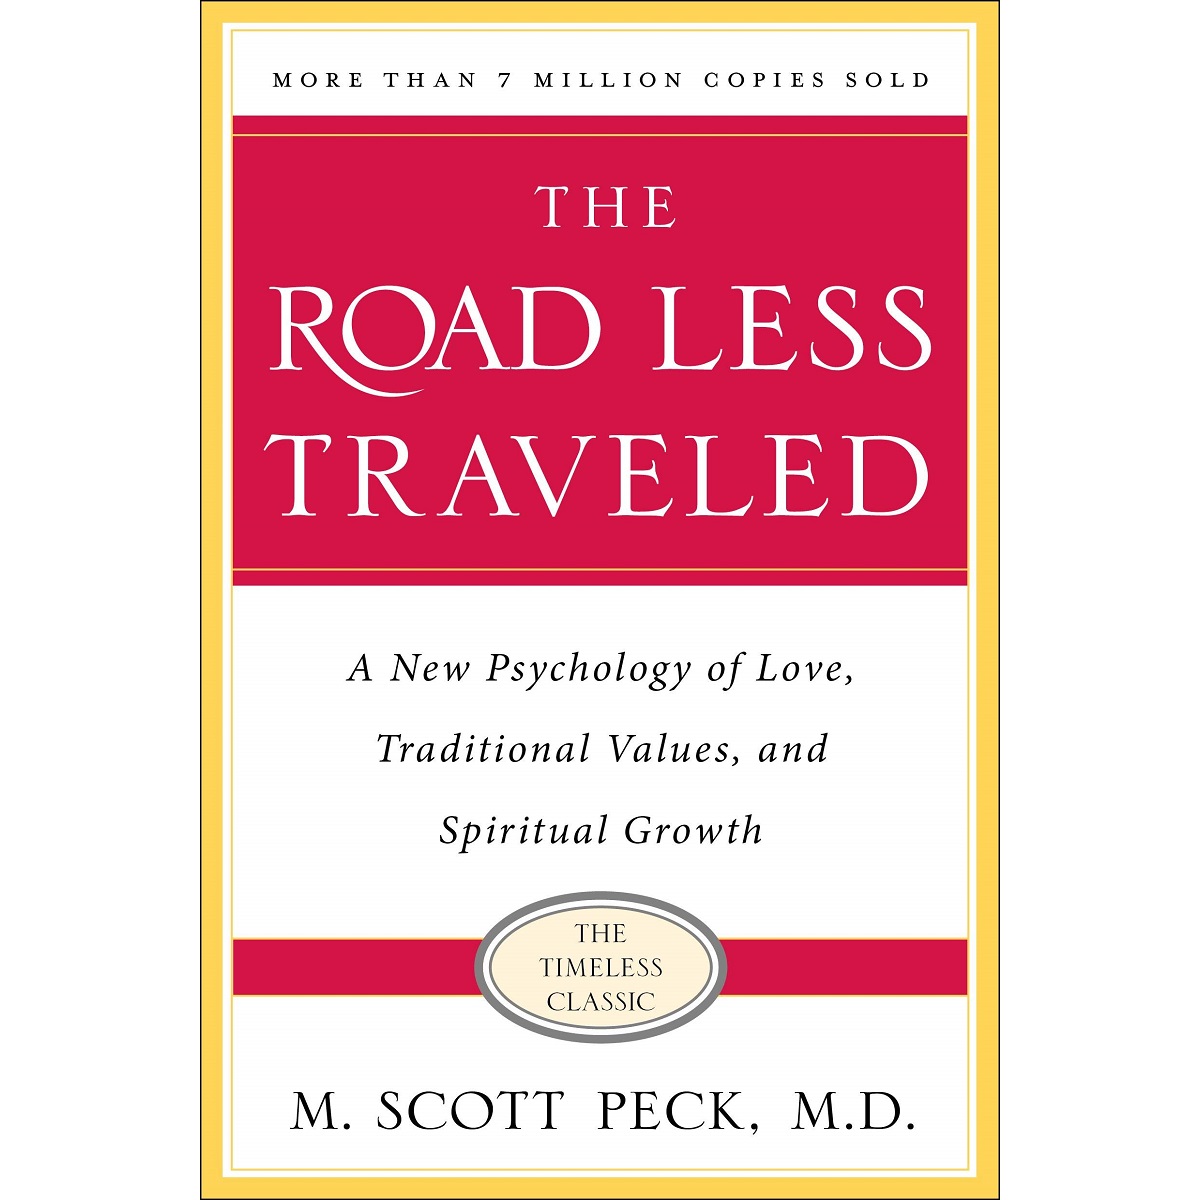 The Road Less Traveled: A New Psychology of Love, Traditional Values and Spiritual Growth by M. Scott Peck